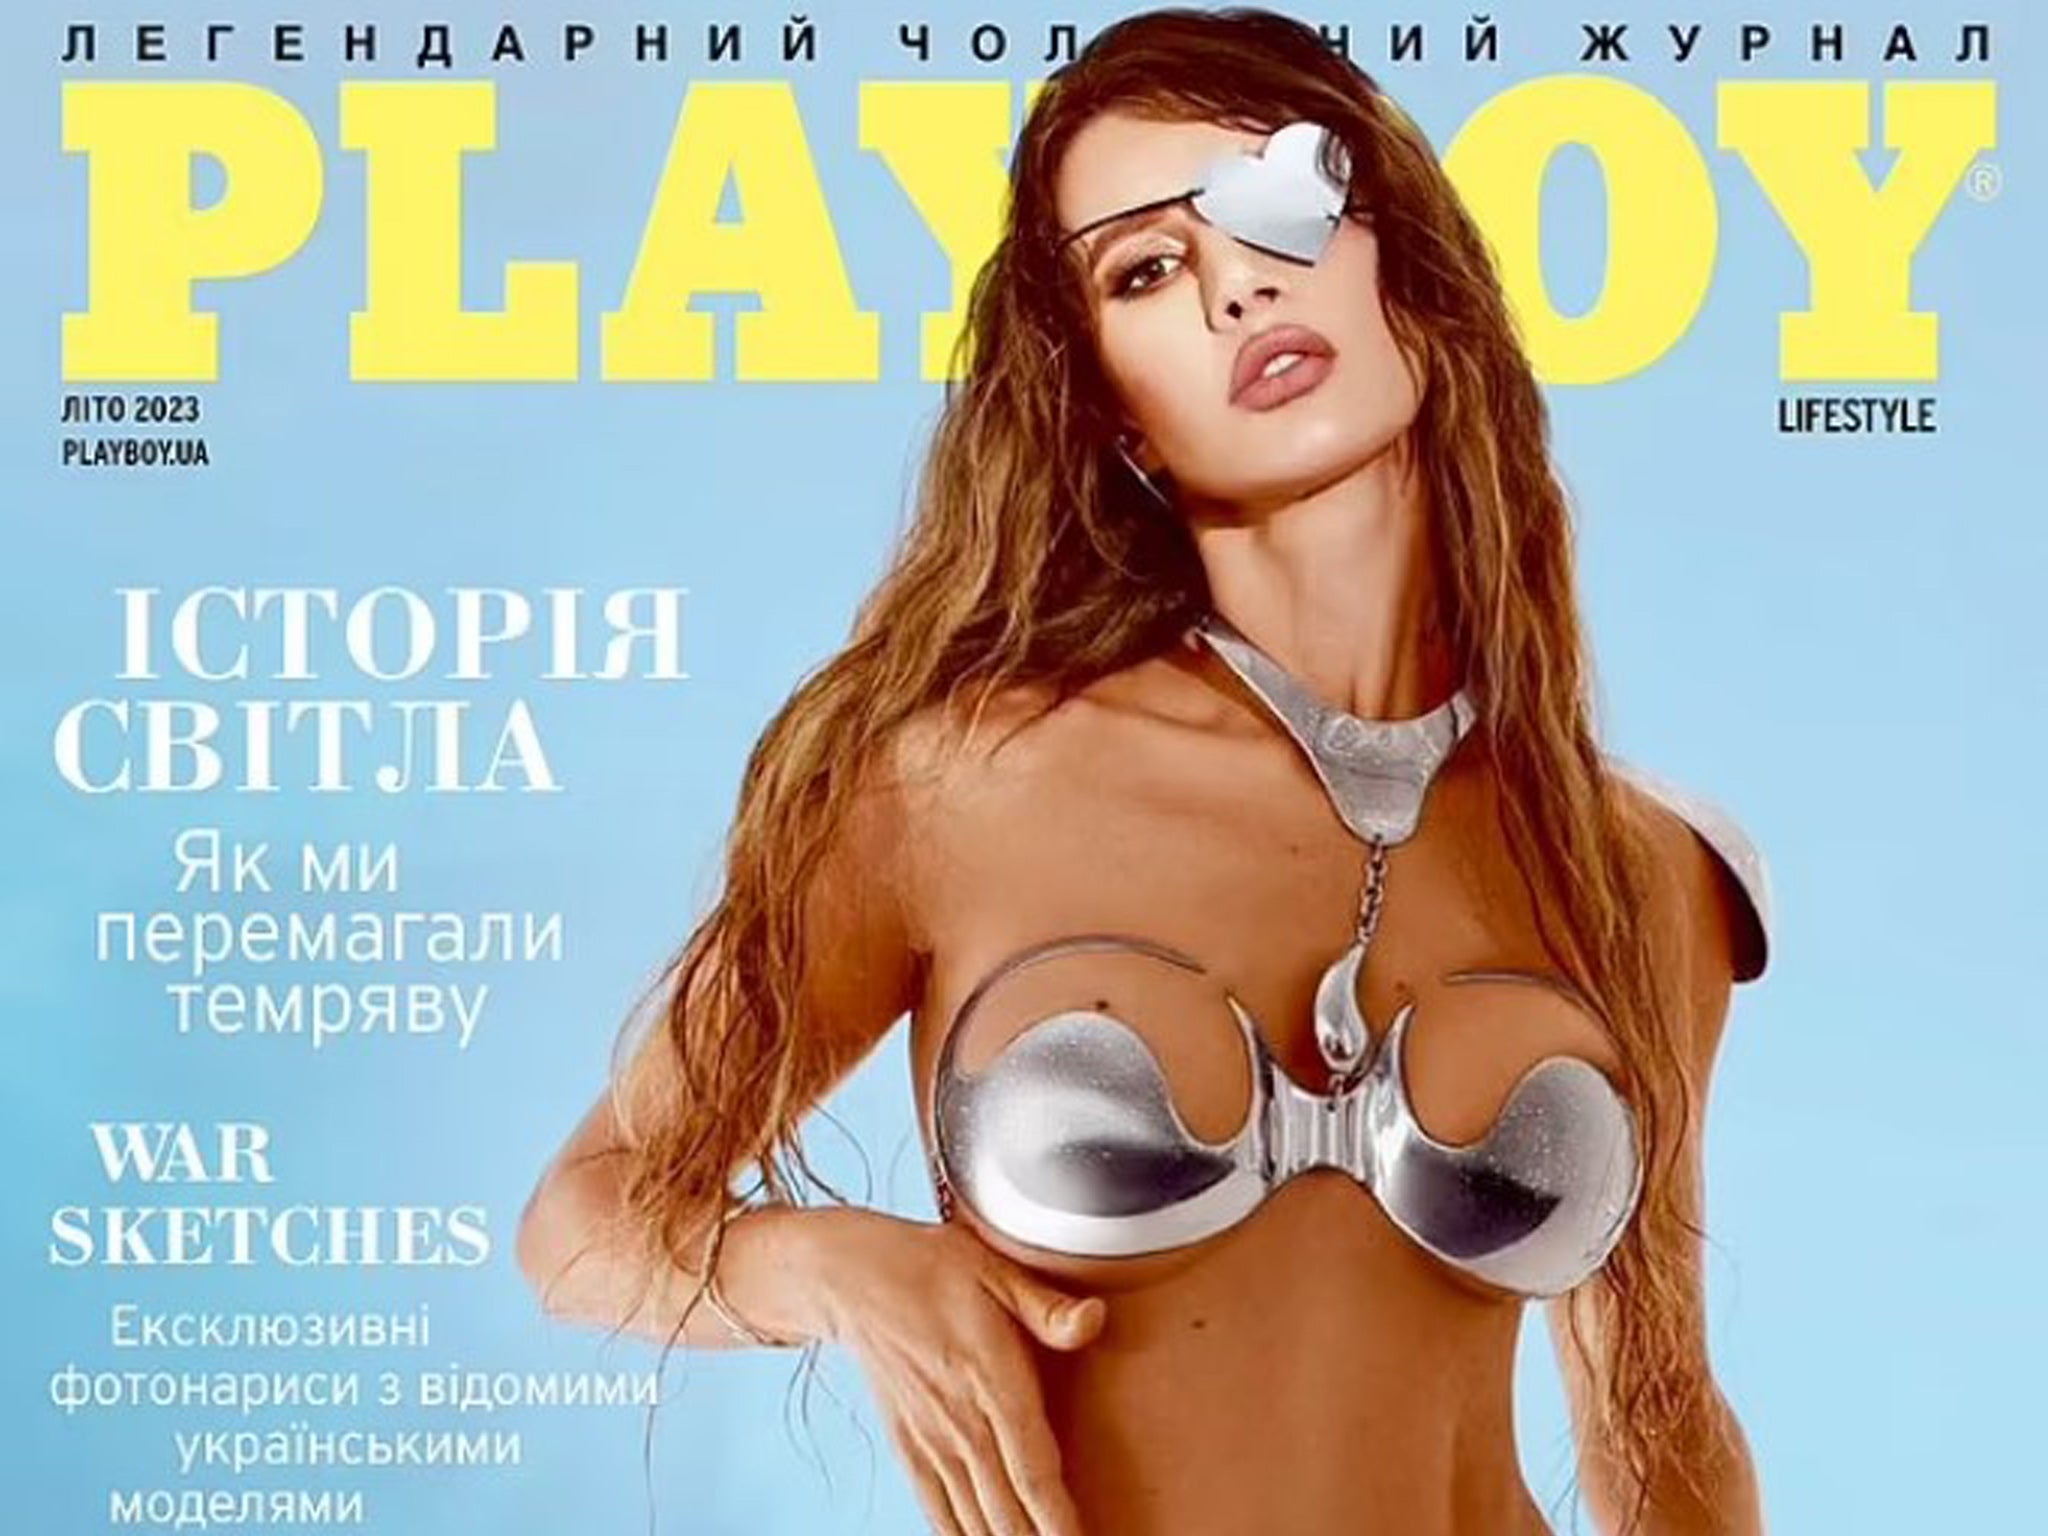 Iryna Bilotserkovets Ukrainian mother who lost an eye in attempted assassination is Playboy cover star The Independent picture